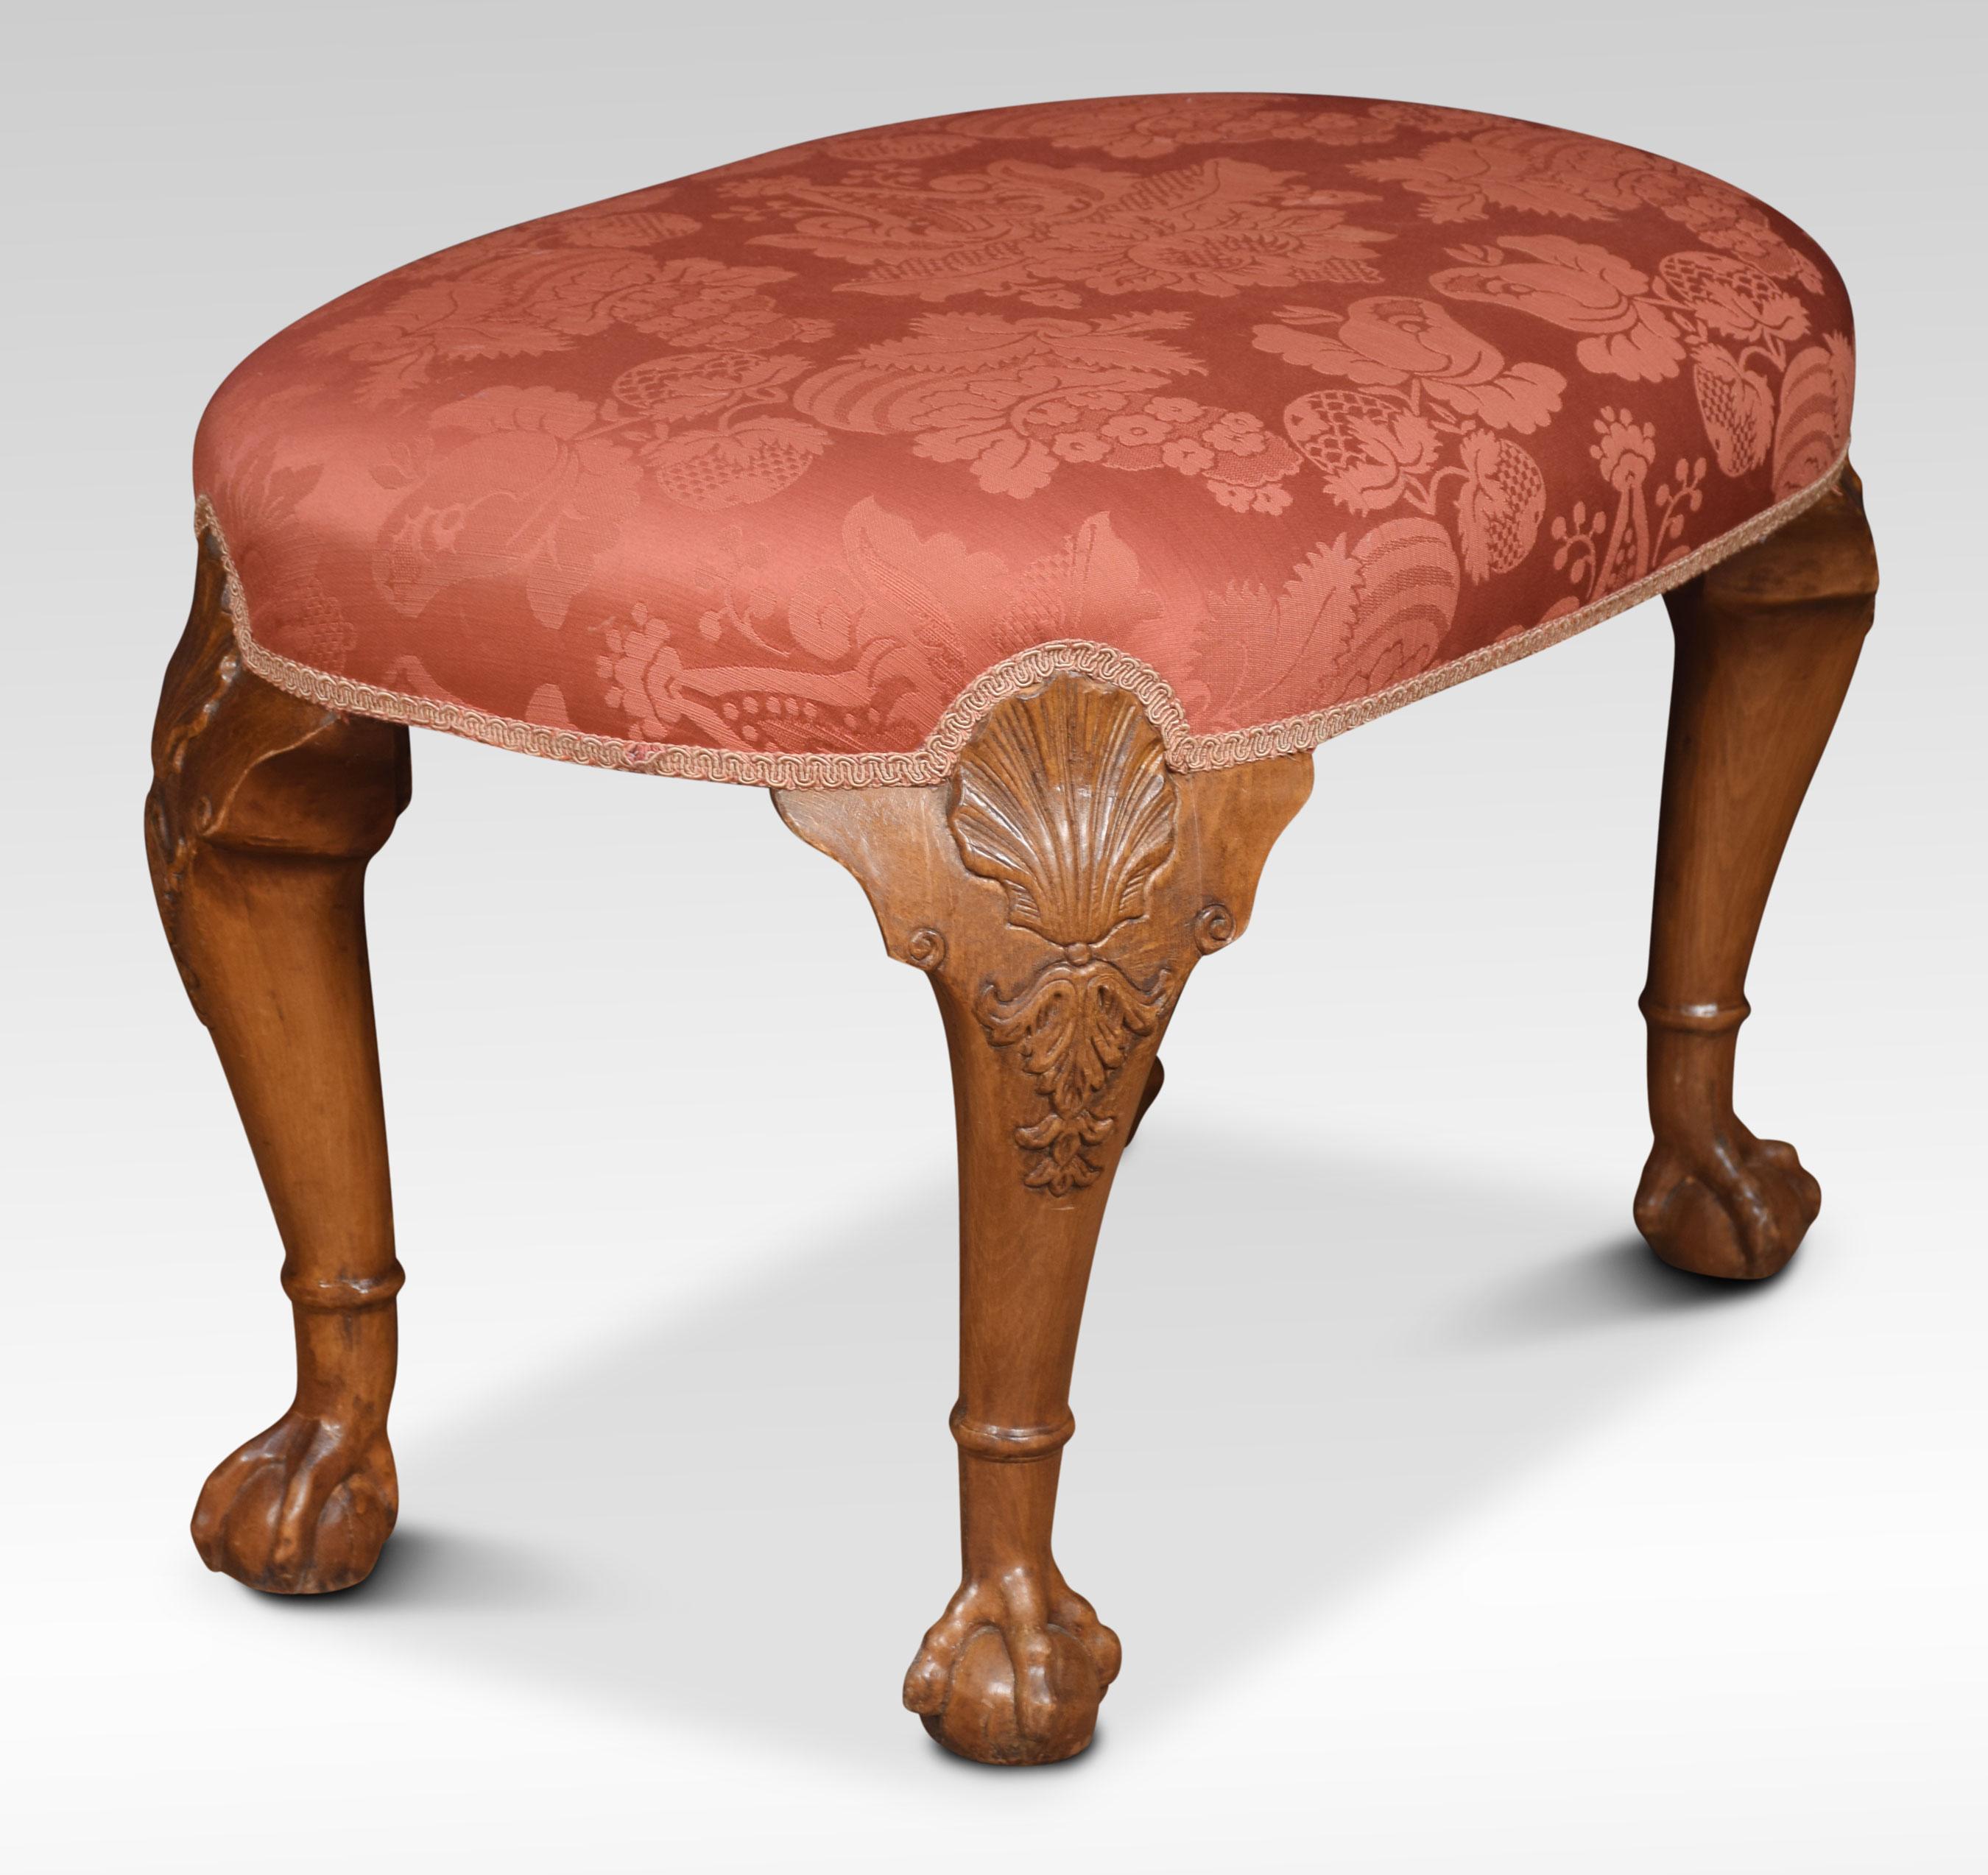 Oval shaped stool with upholstered overstuffed seat, above four walnut shell capped cabriole legs terminating in ball and claw feet.
Dimensions:
Height 18 inches
Width 29 inches
Depth 18 inches.